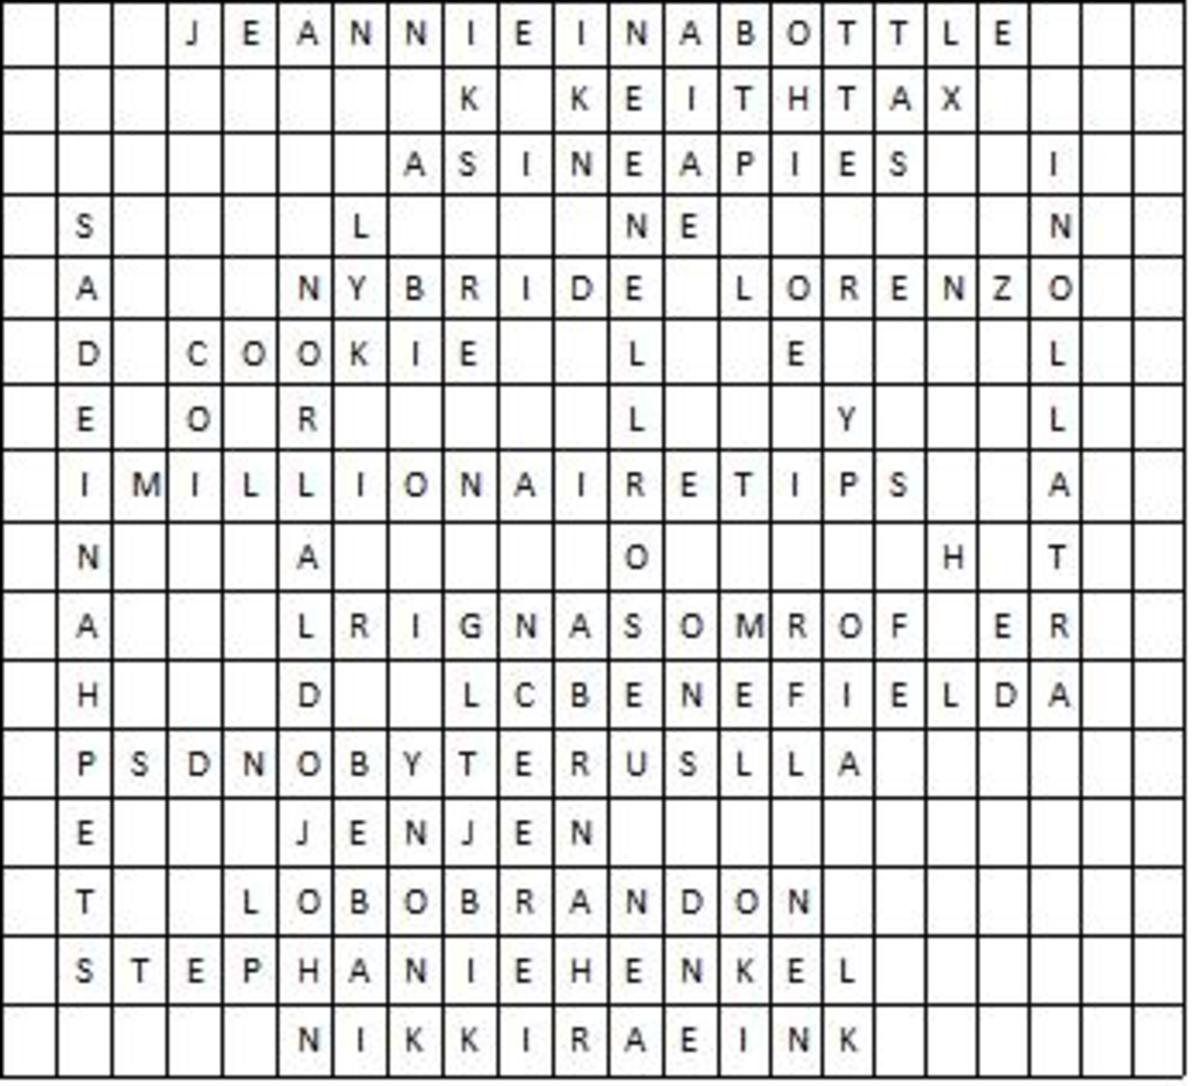 All the words have been entered into the word search puzzle grid.